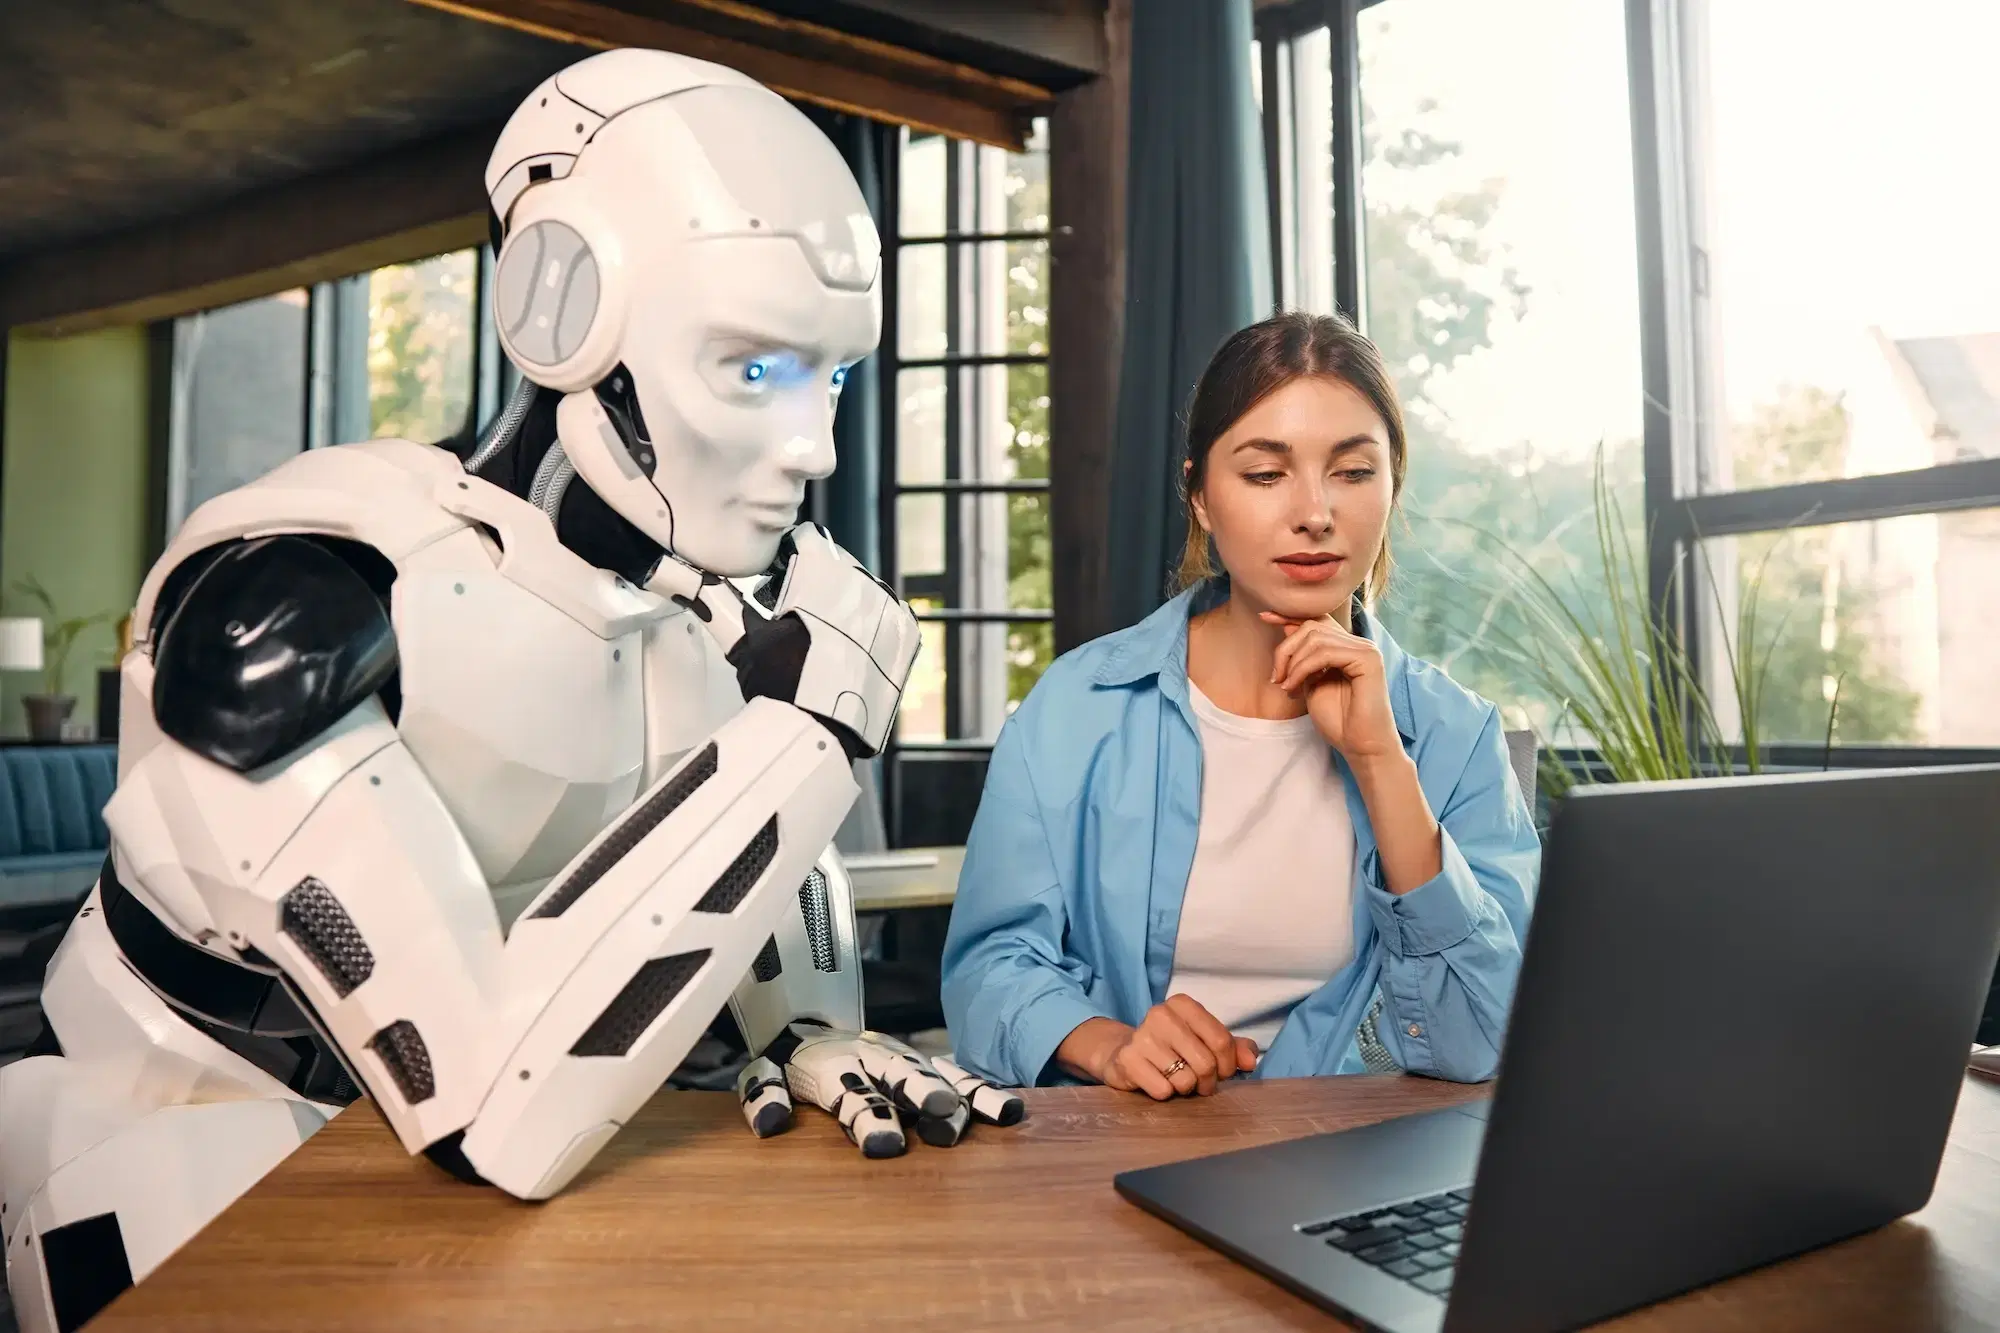 A young woman and a robot working together on a laptop in office